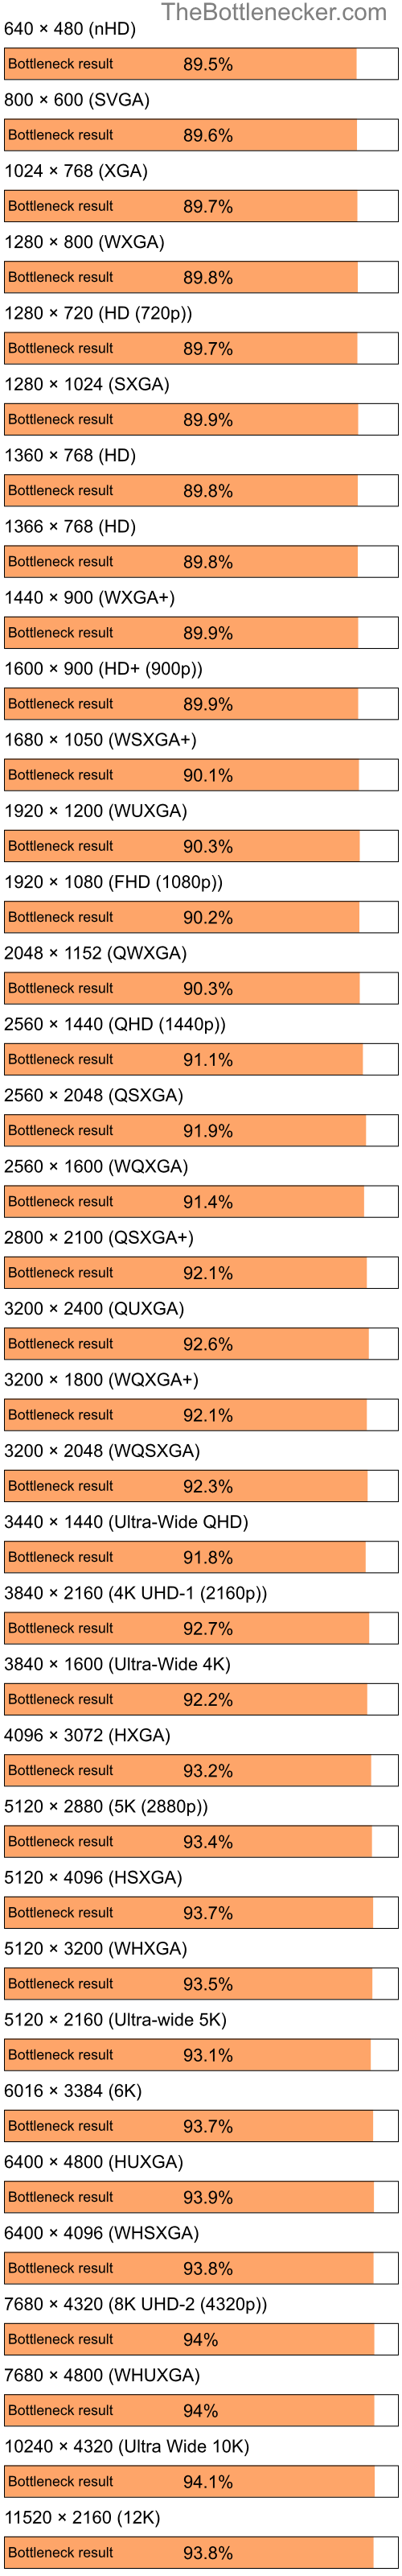 Bottleneck results by resolution for Intel Pentium 4 and NVIDIA GeForce2 MX 100 in Processor Intense Tasks